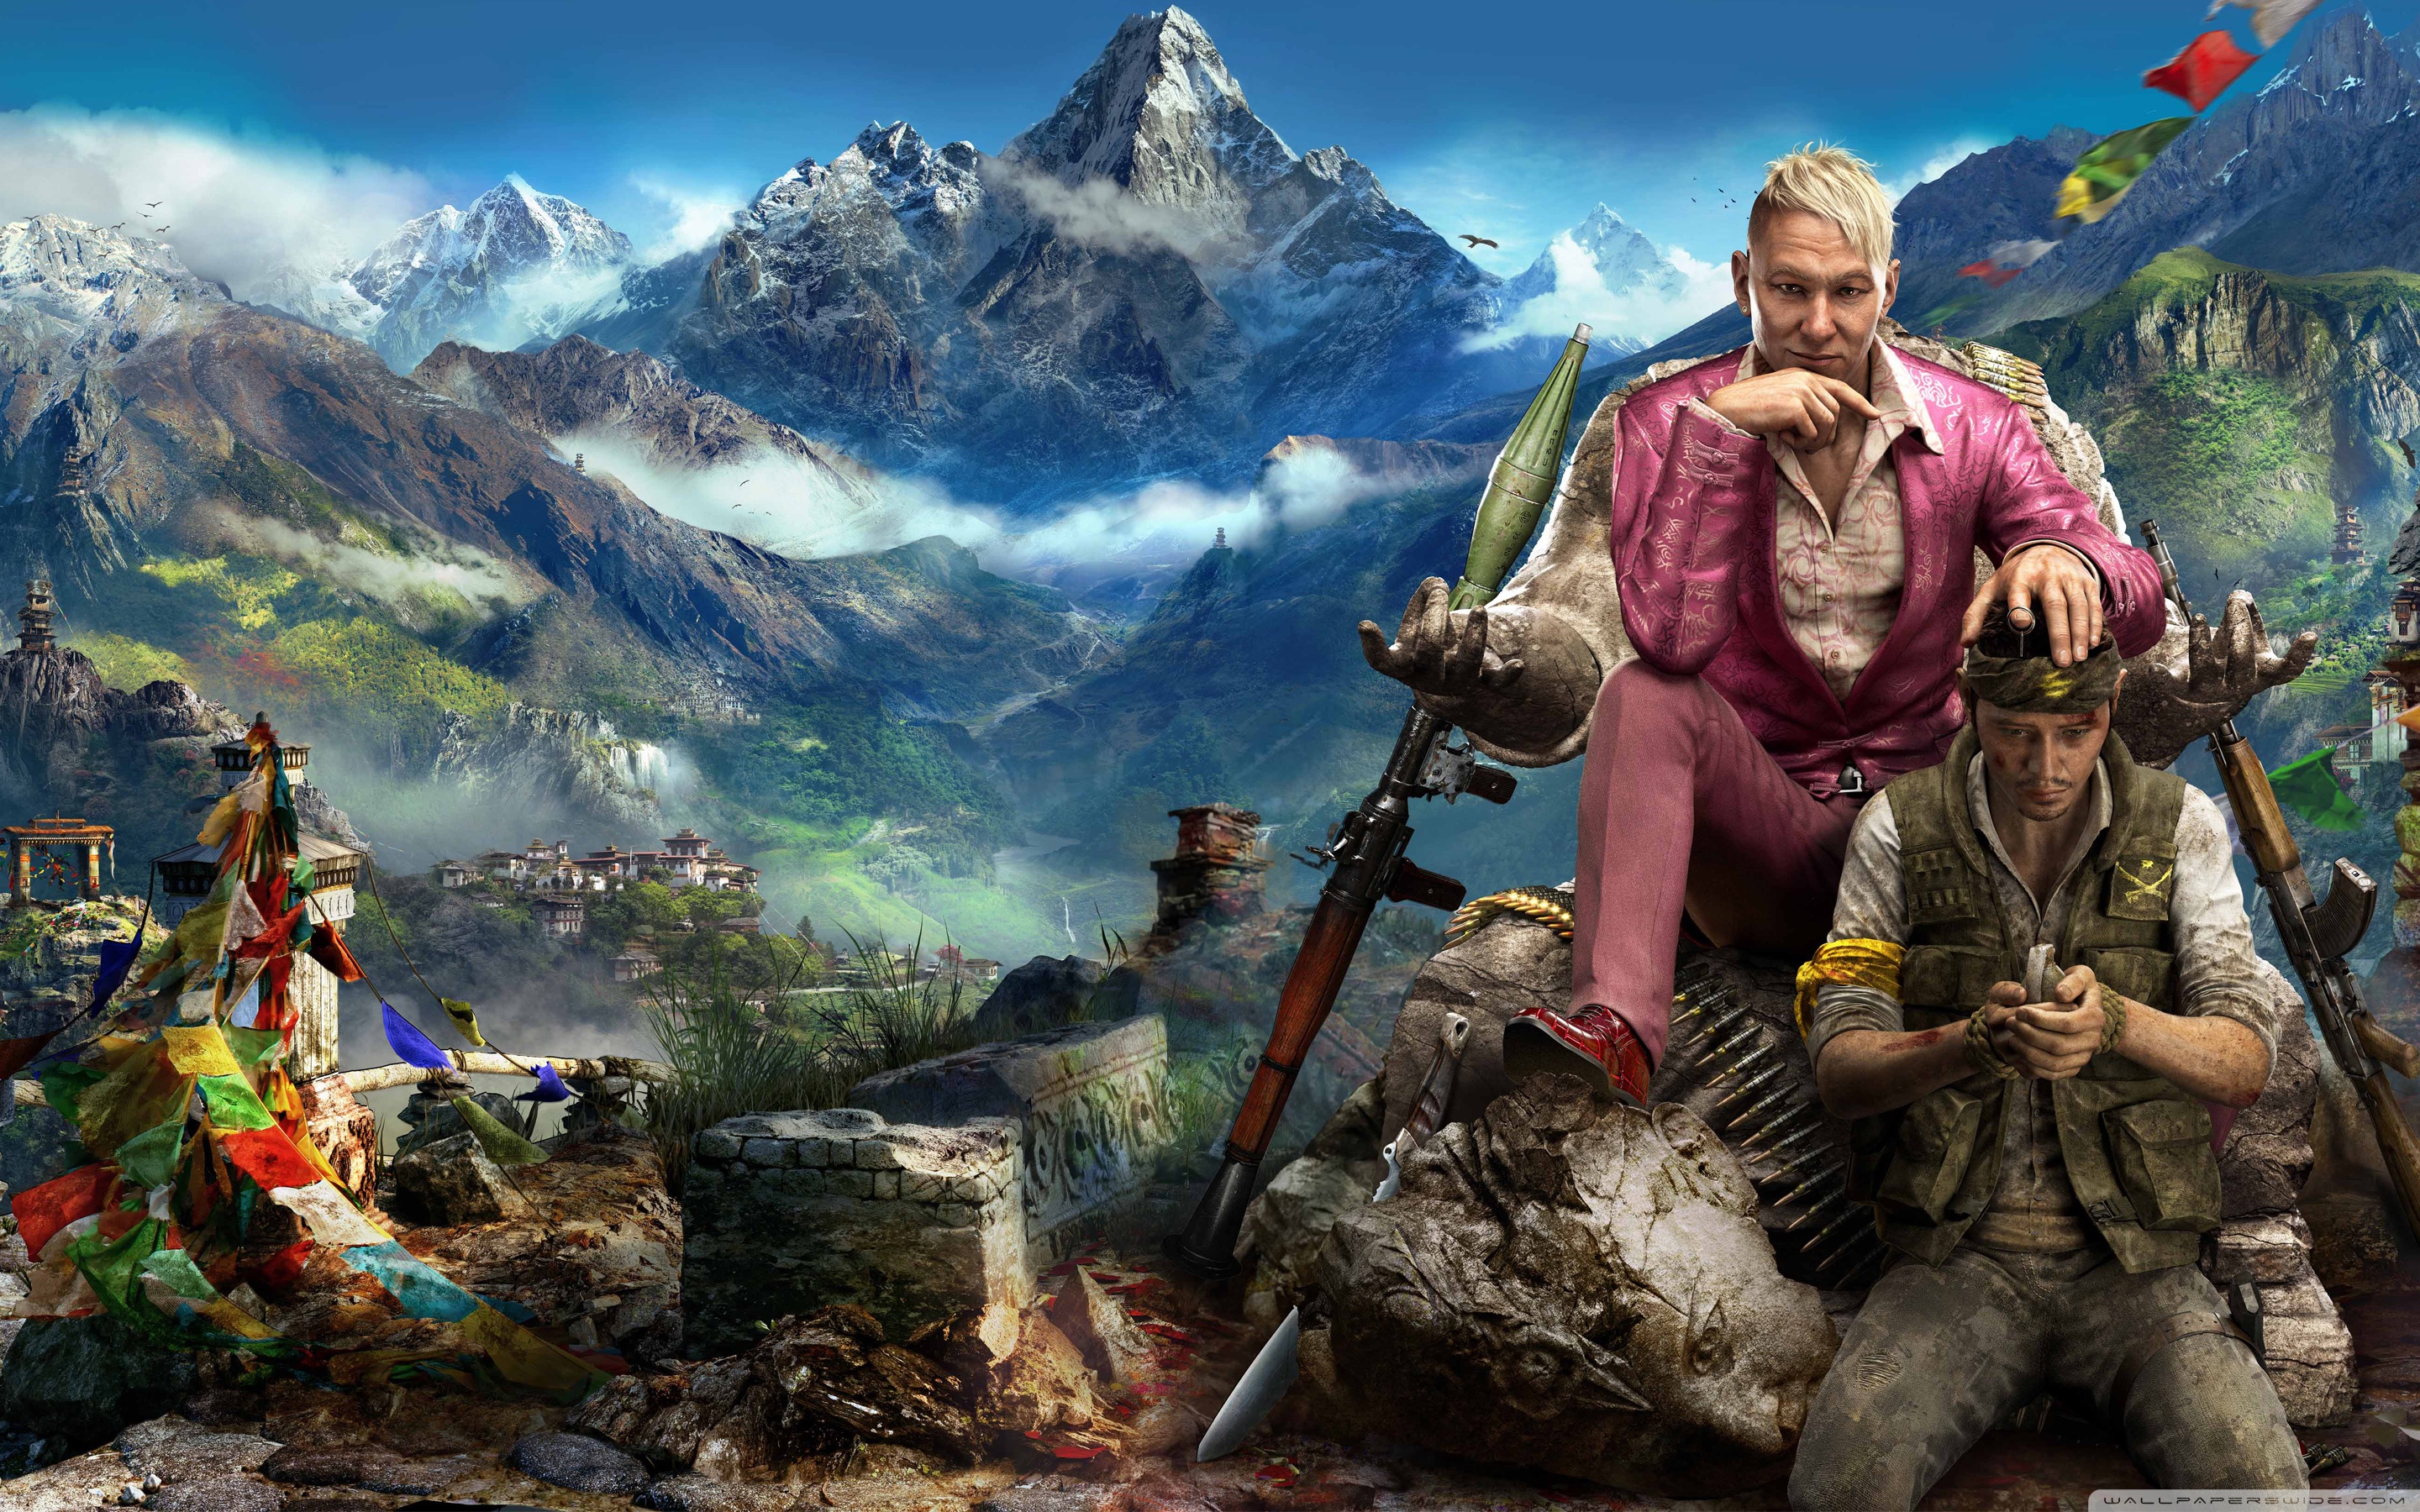 Download Far Cry 4 For Mac